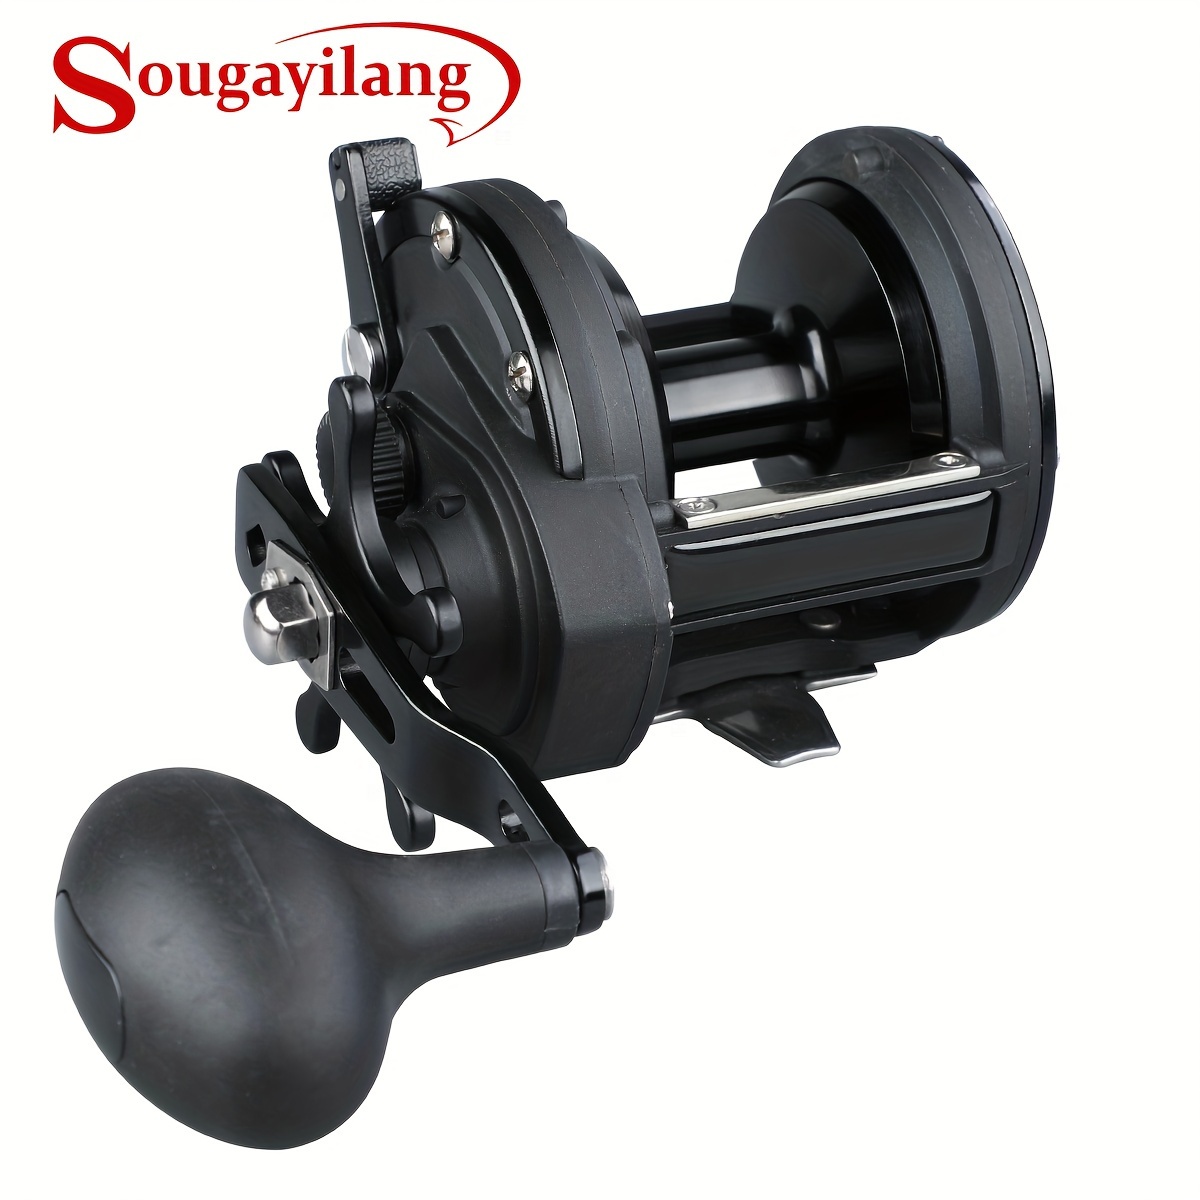 Spinning Fishing Reel Max Drag 30KG 4+1BB 4.1:1 Gear Ratio with Left Right  Interchangeable Fishing Reel for Freshwater Saltwater